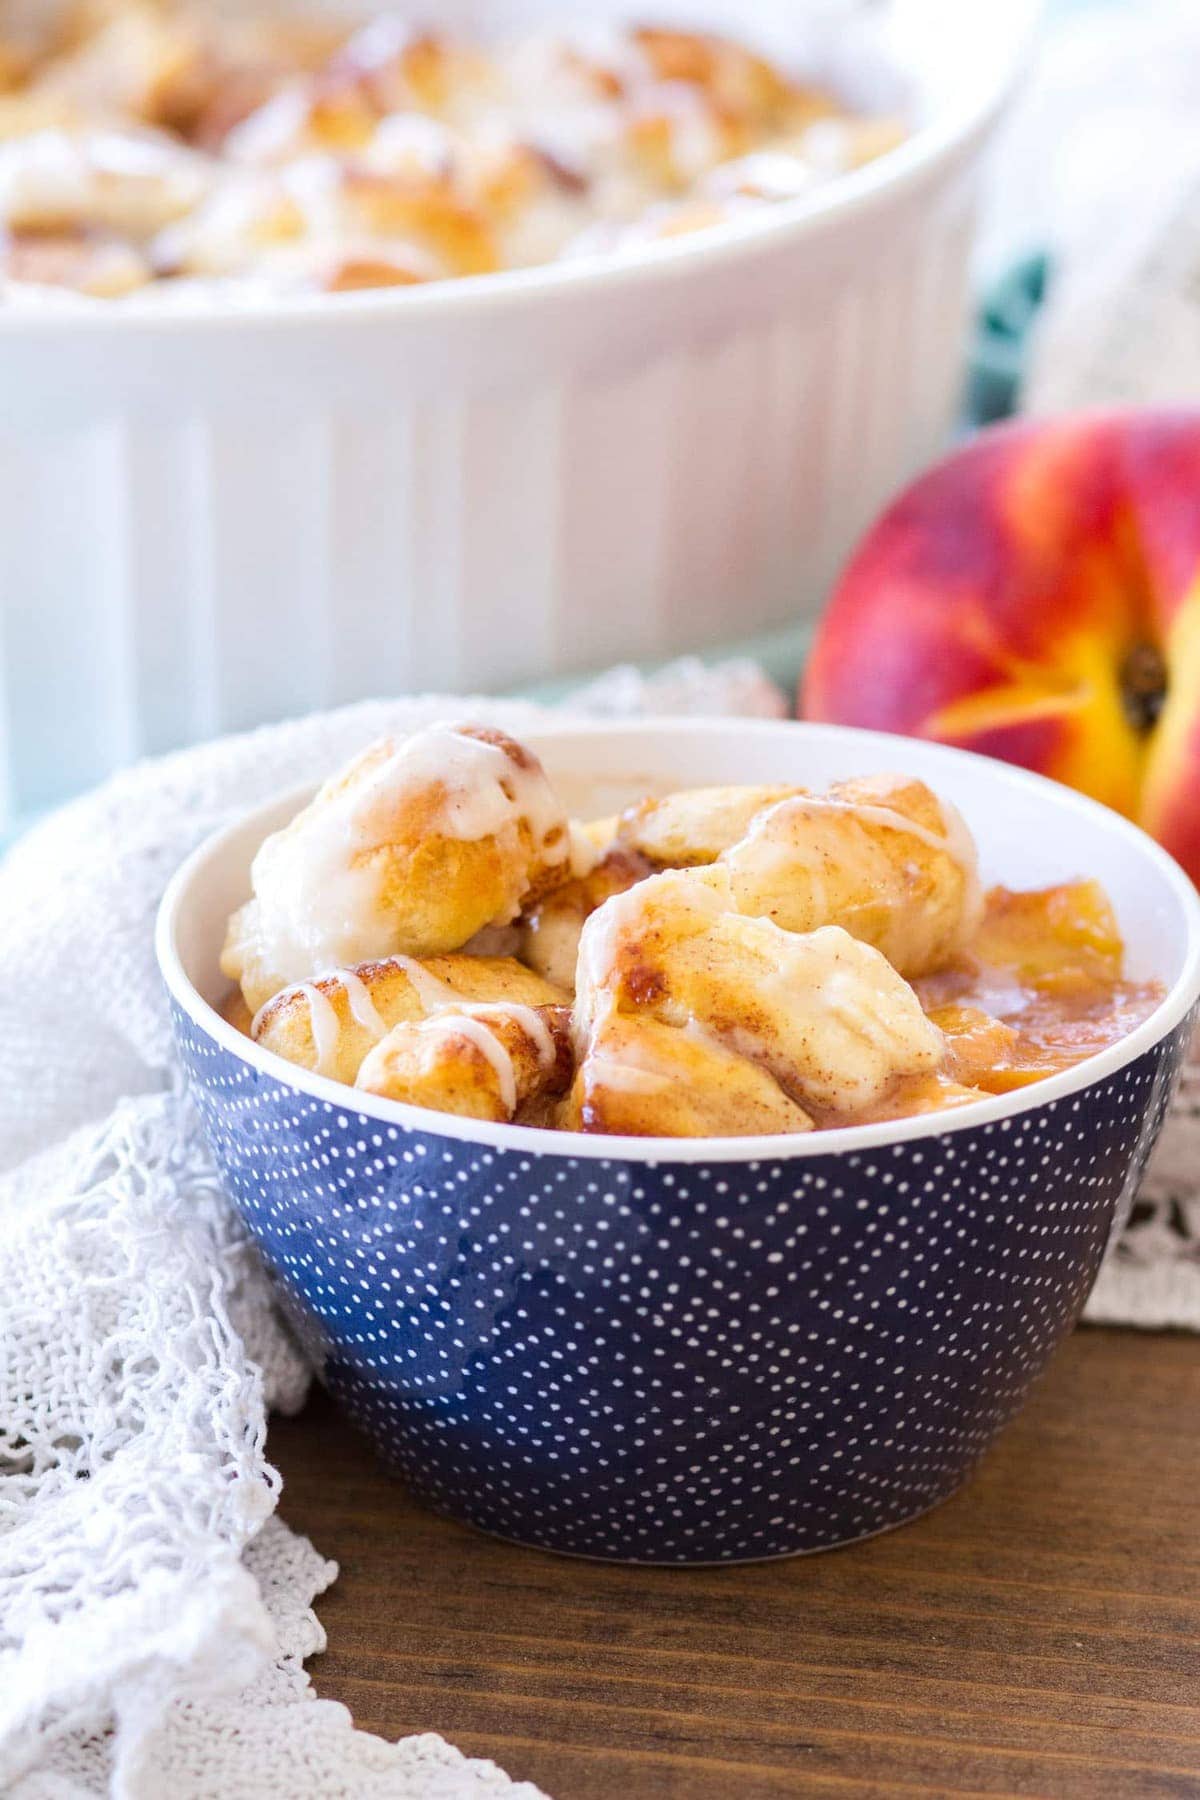 This Easy Cinnamon Roll Peach Cobbler is made with fresh peaches, sweet spices, and pre-made cinnamon roll dough. The final component of this cinnamon roll peach cobbler recipe is a sweet vanilla glaze, making this a quick and easy summer dessert! 